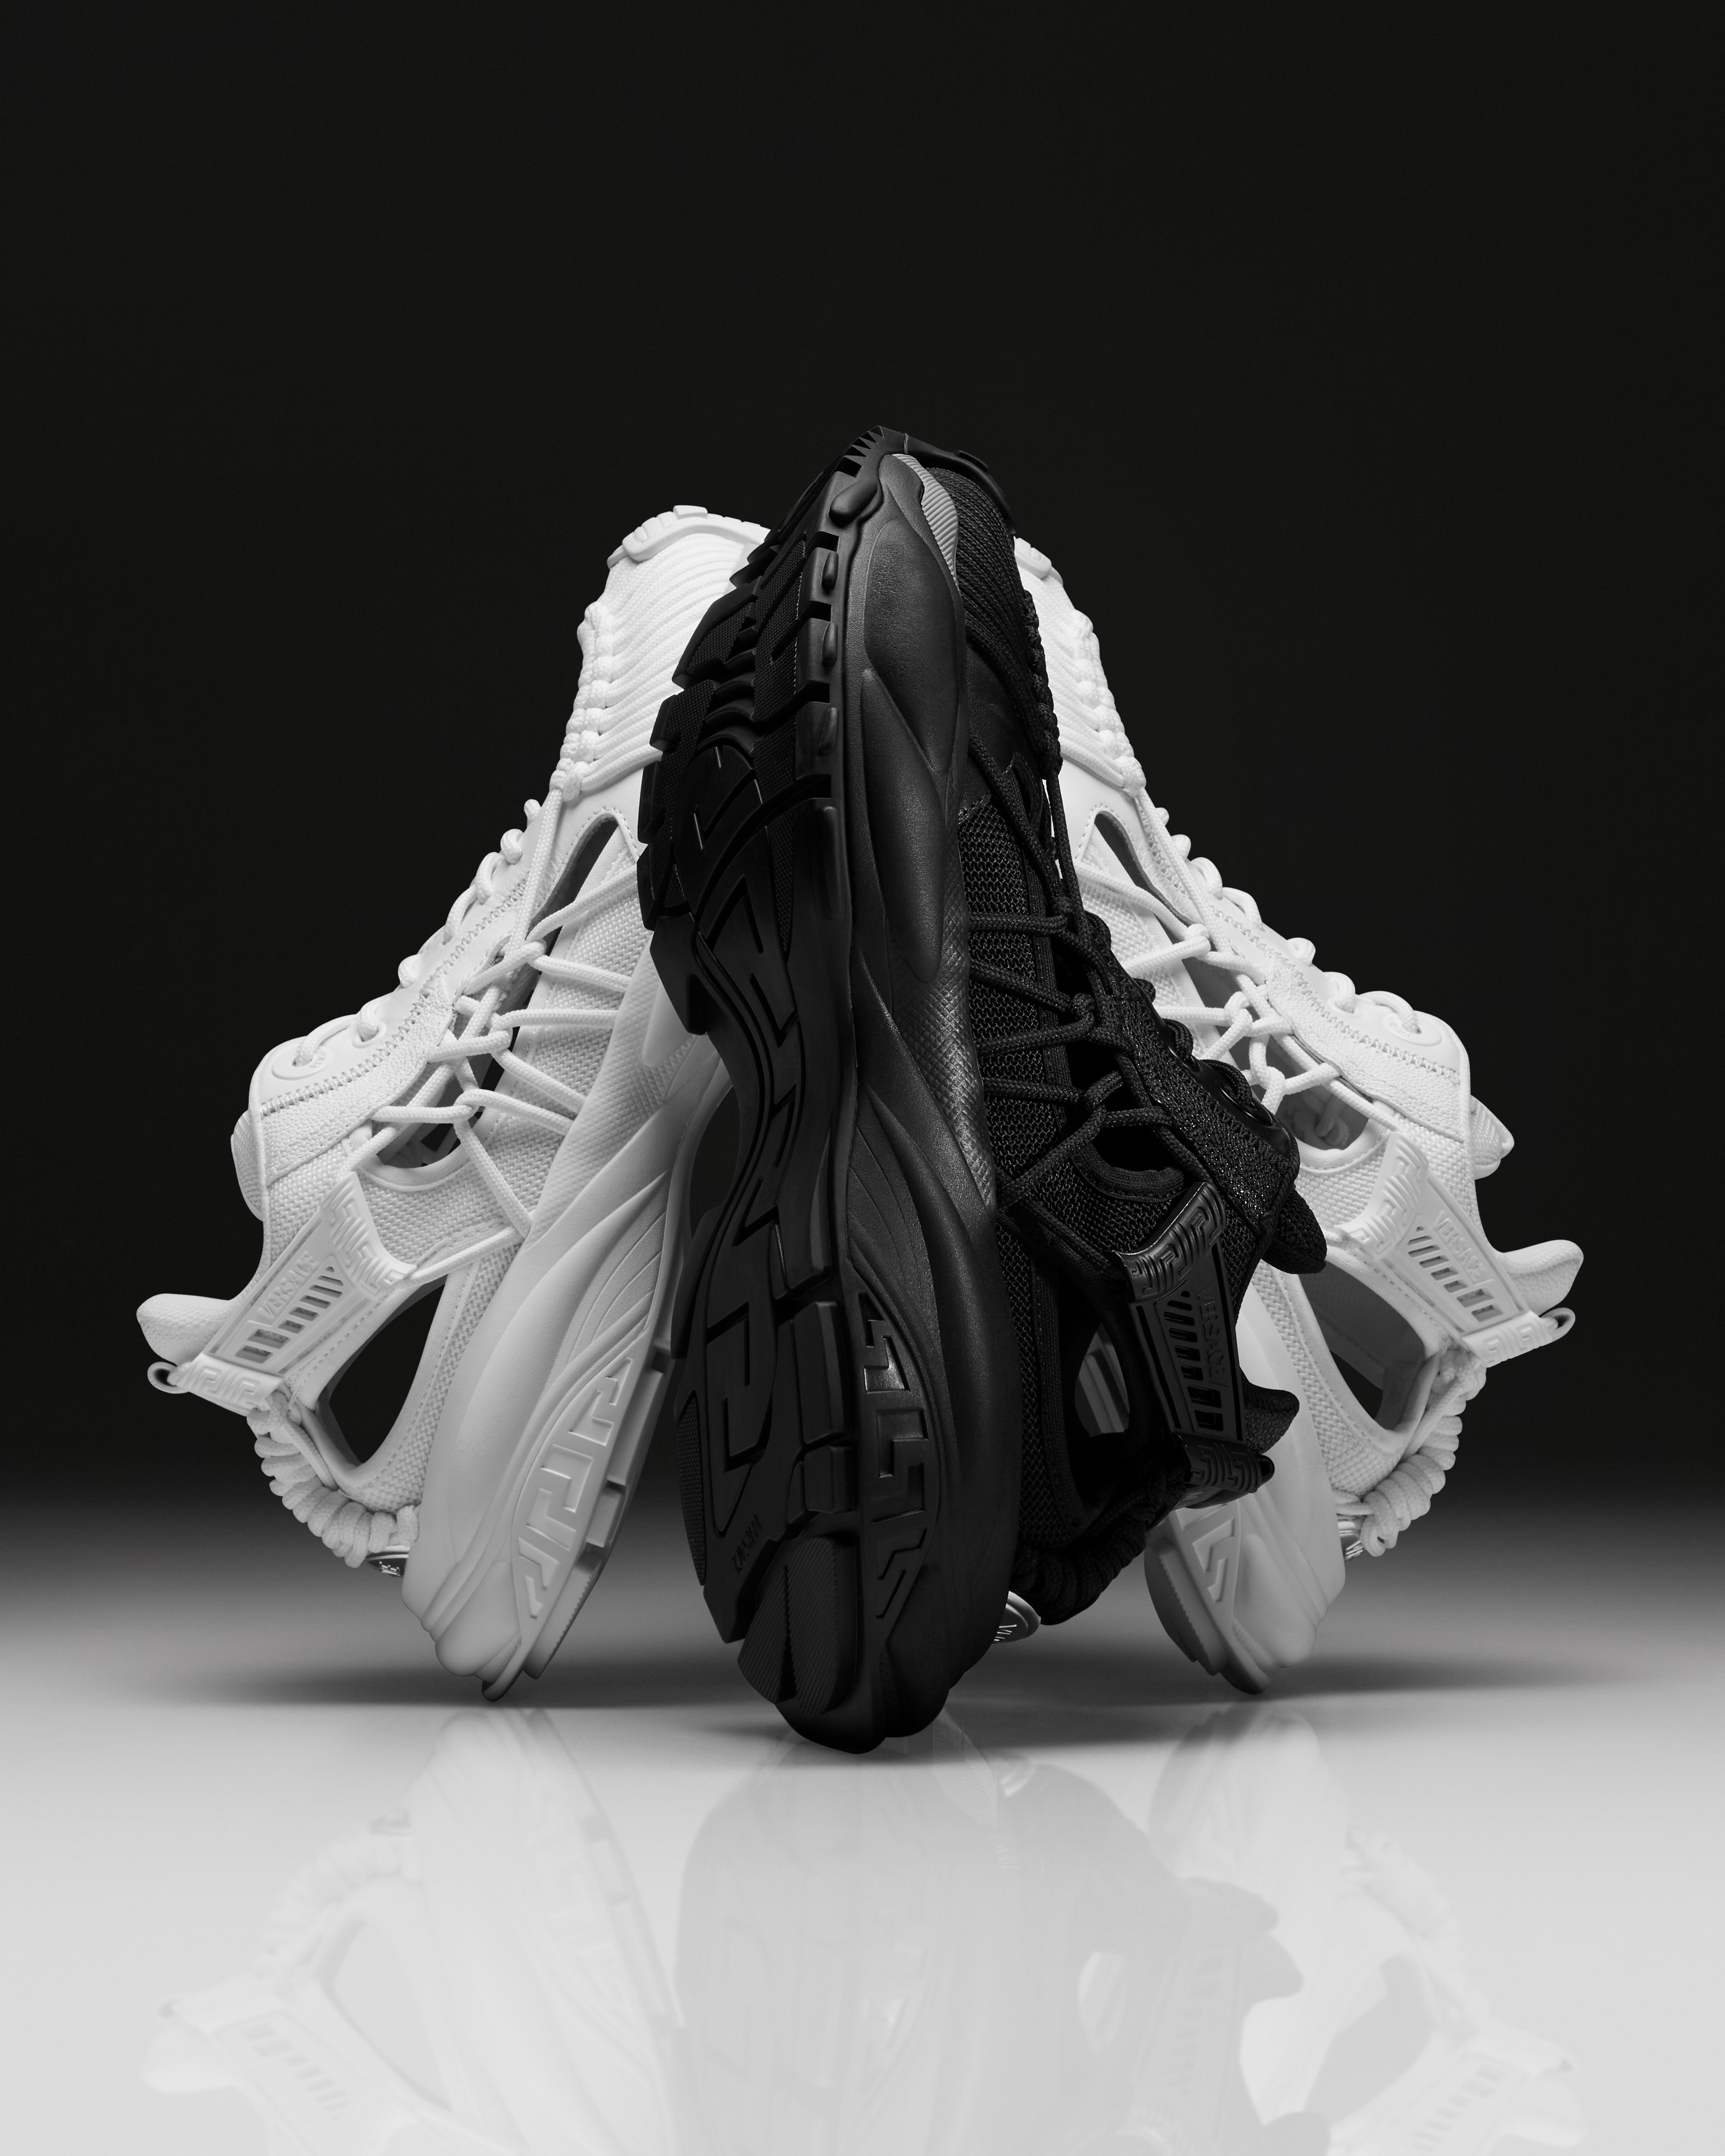 A pair of white sneakers and a pair of black sneakers are arranged artfully with their soles facing out, creating a dynamic, symmetrical display